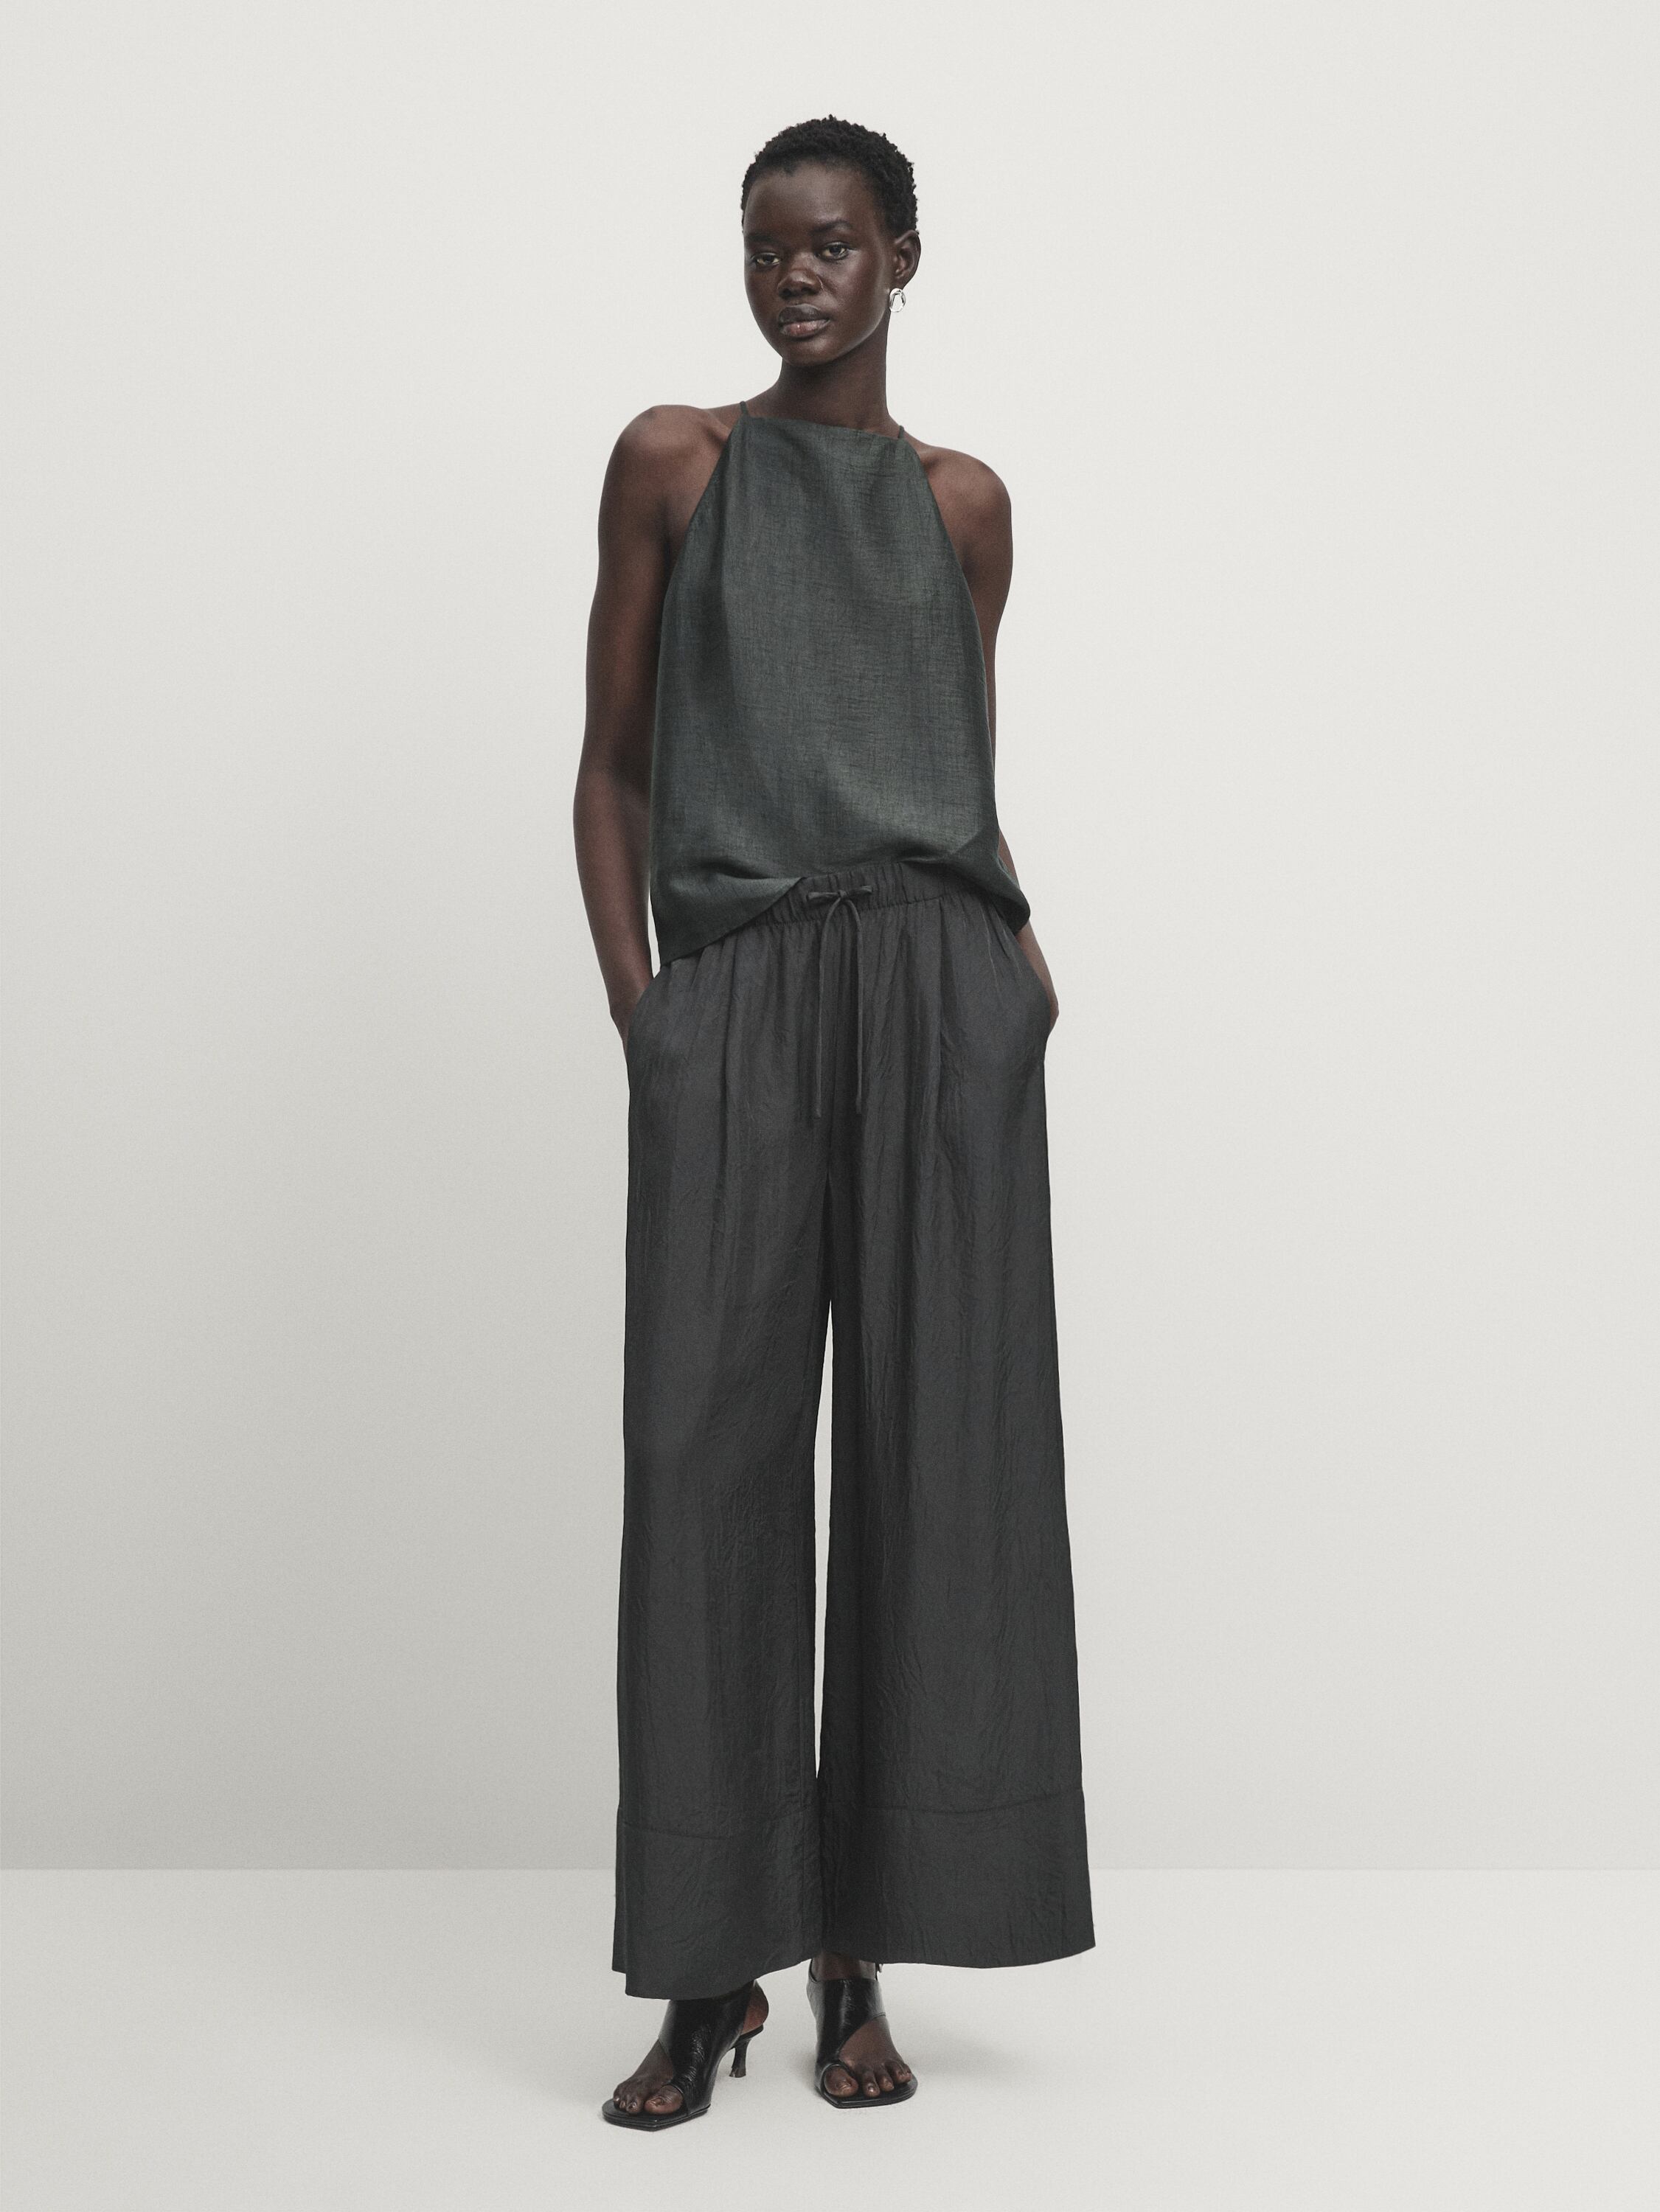 Satin trousers with elasticated waistband and double hems